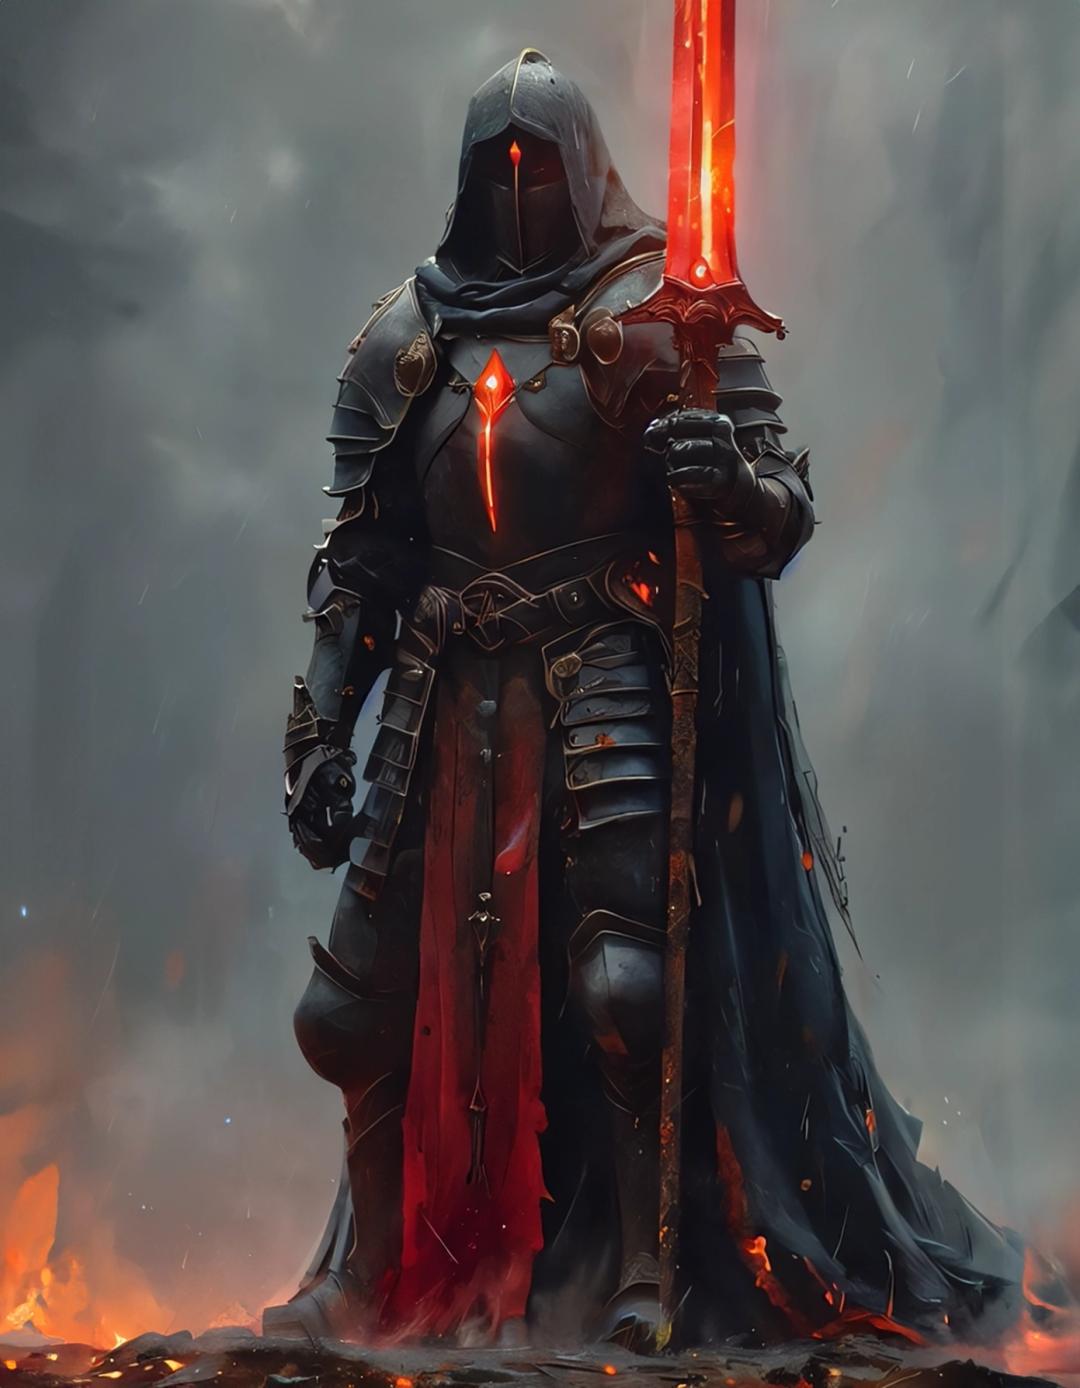 Darknight with red glowing spear